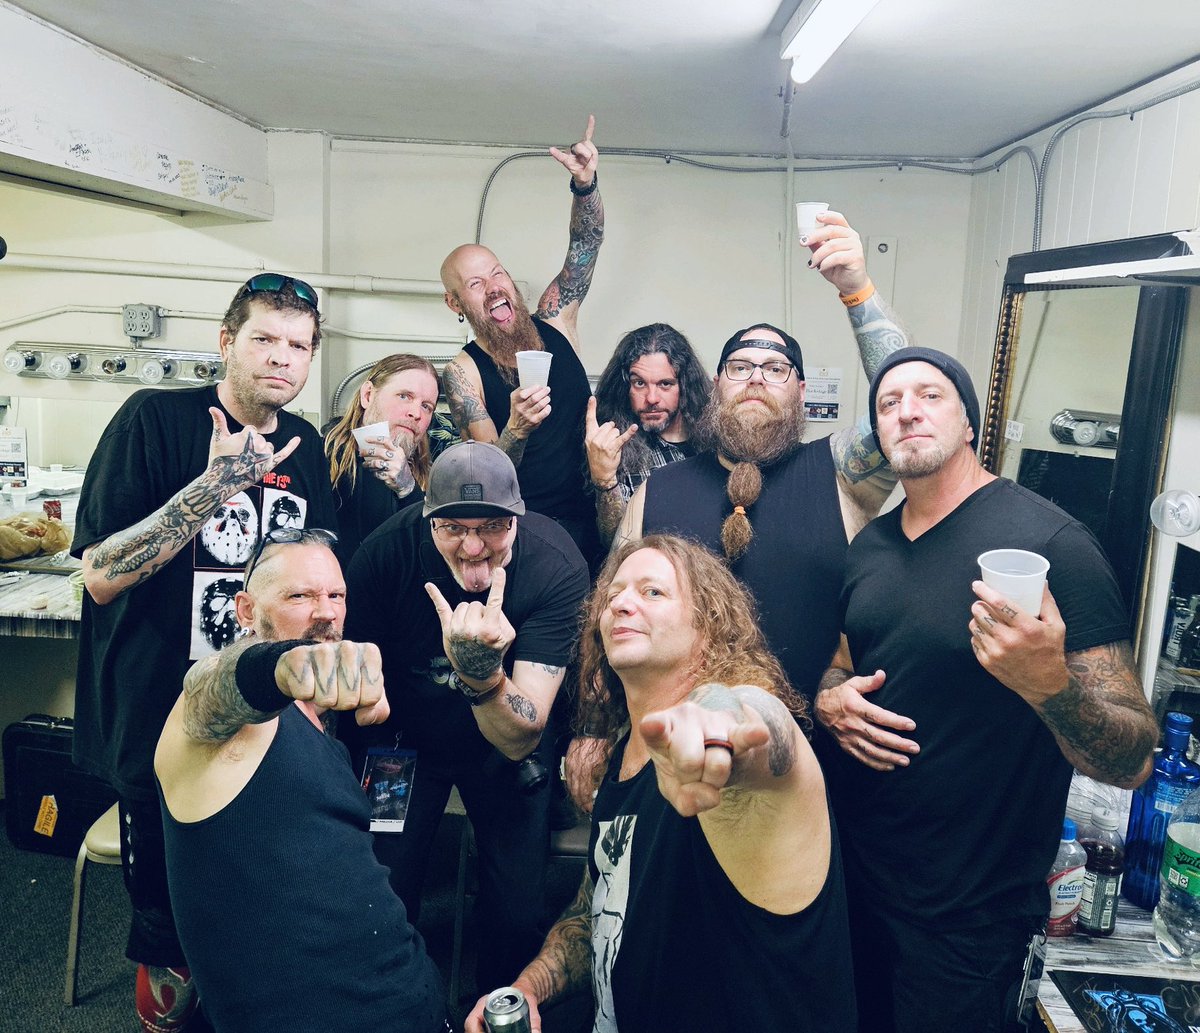 A bittersweet end. We had a blast as always with our brothers Drowning Pool and Saliva. Love sharing the stage with these great artists. Until next time keep it SNAFU 🤘 #AnyGivenSin #SNAFU #Tour #Wrap #DrowningPool #Saliva #Rock #Family #Cheers